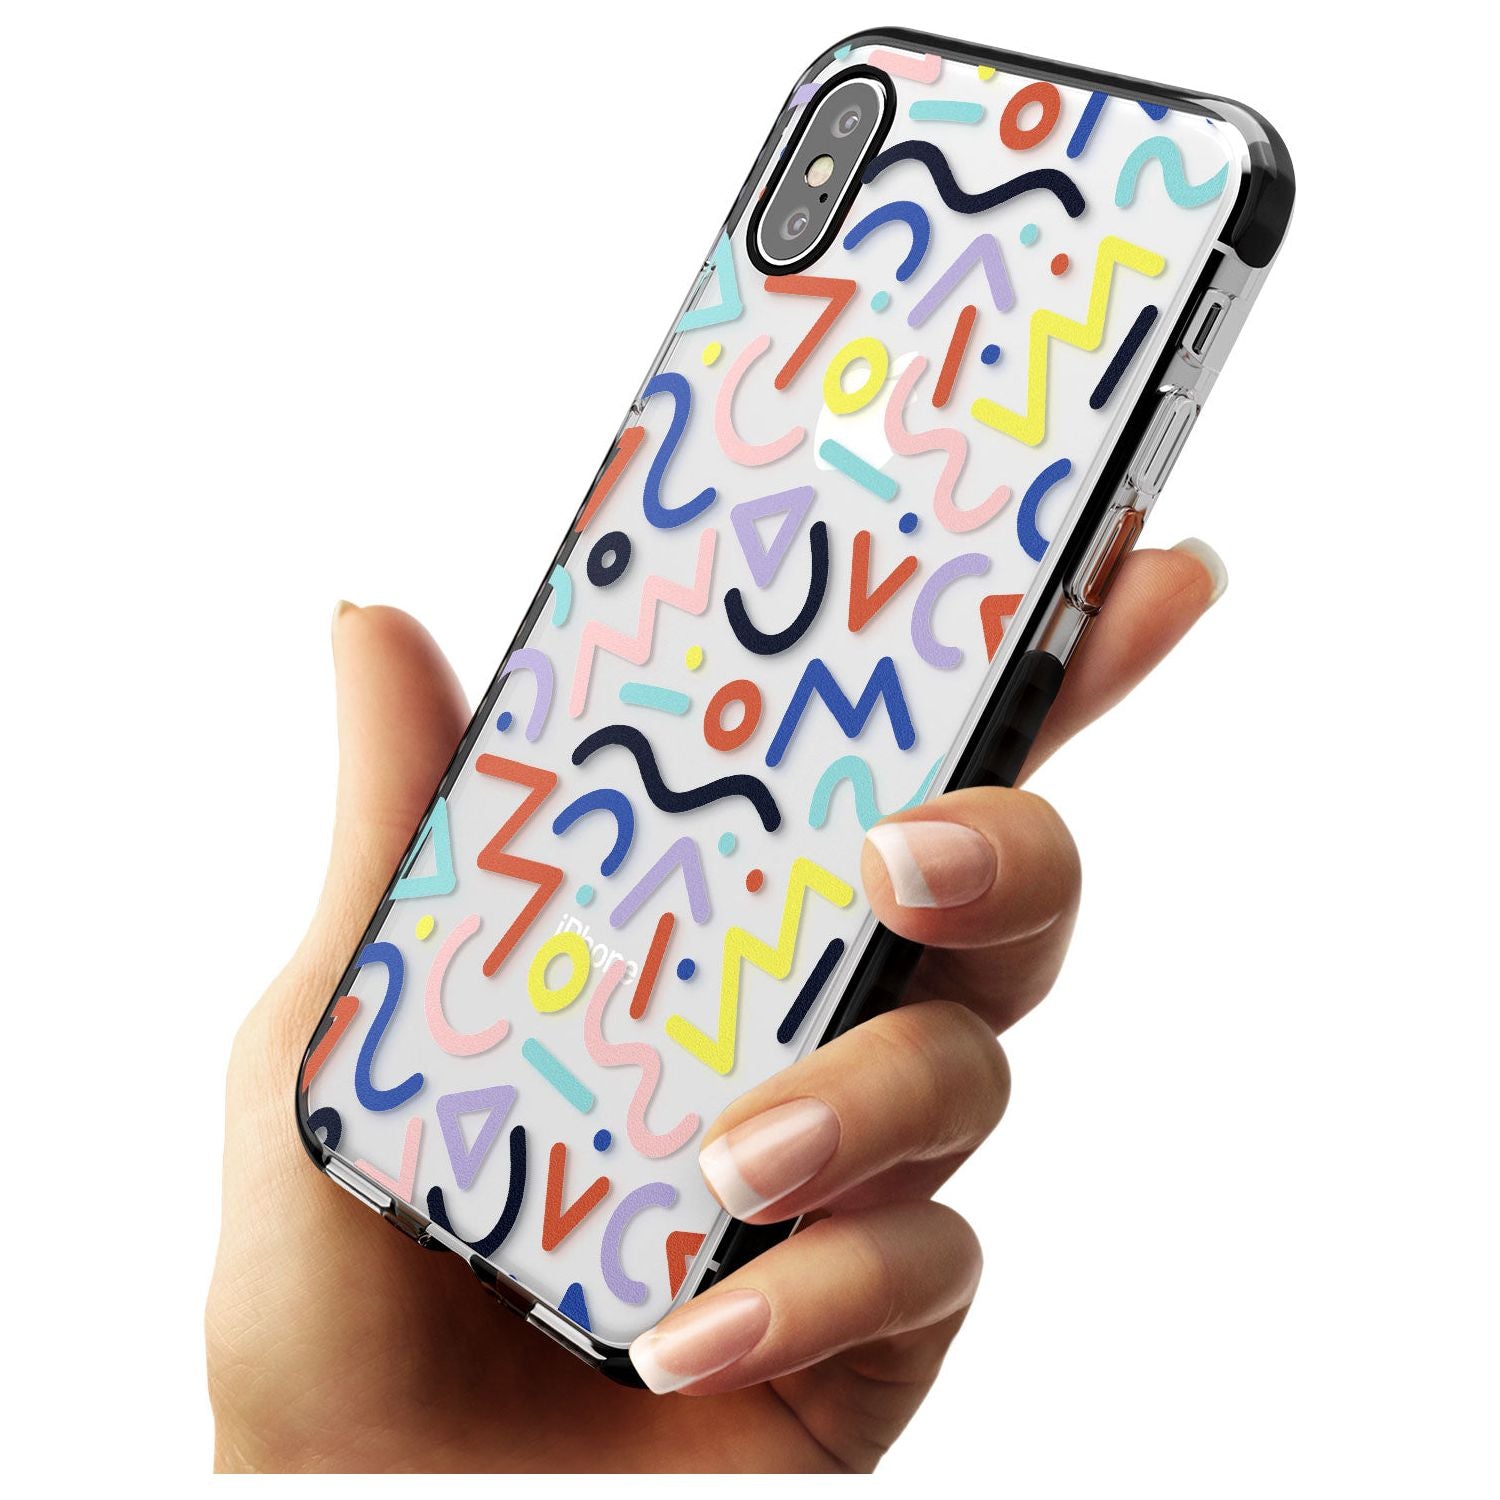 Colourful Squiggles Memphis Retro Pattern Design Black Impact Phone Case for iPhone X XS Max XR